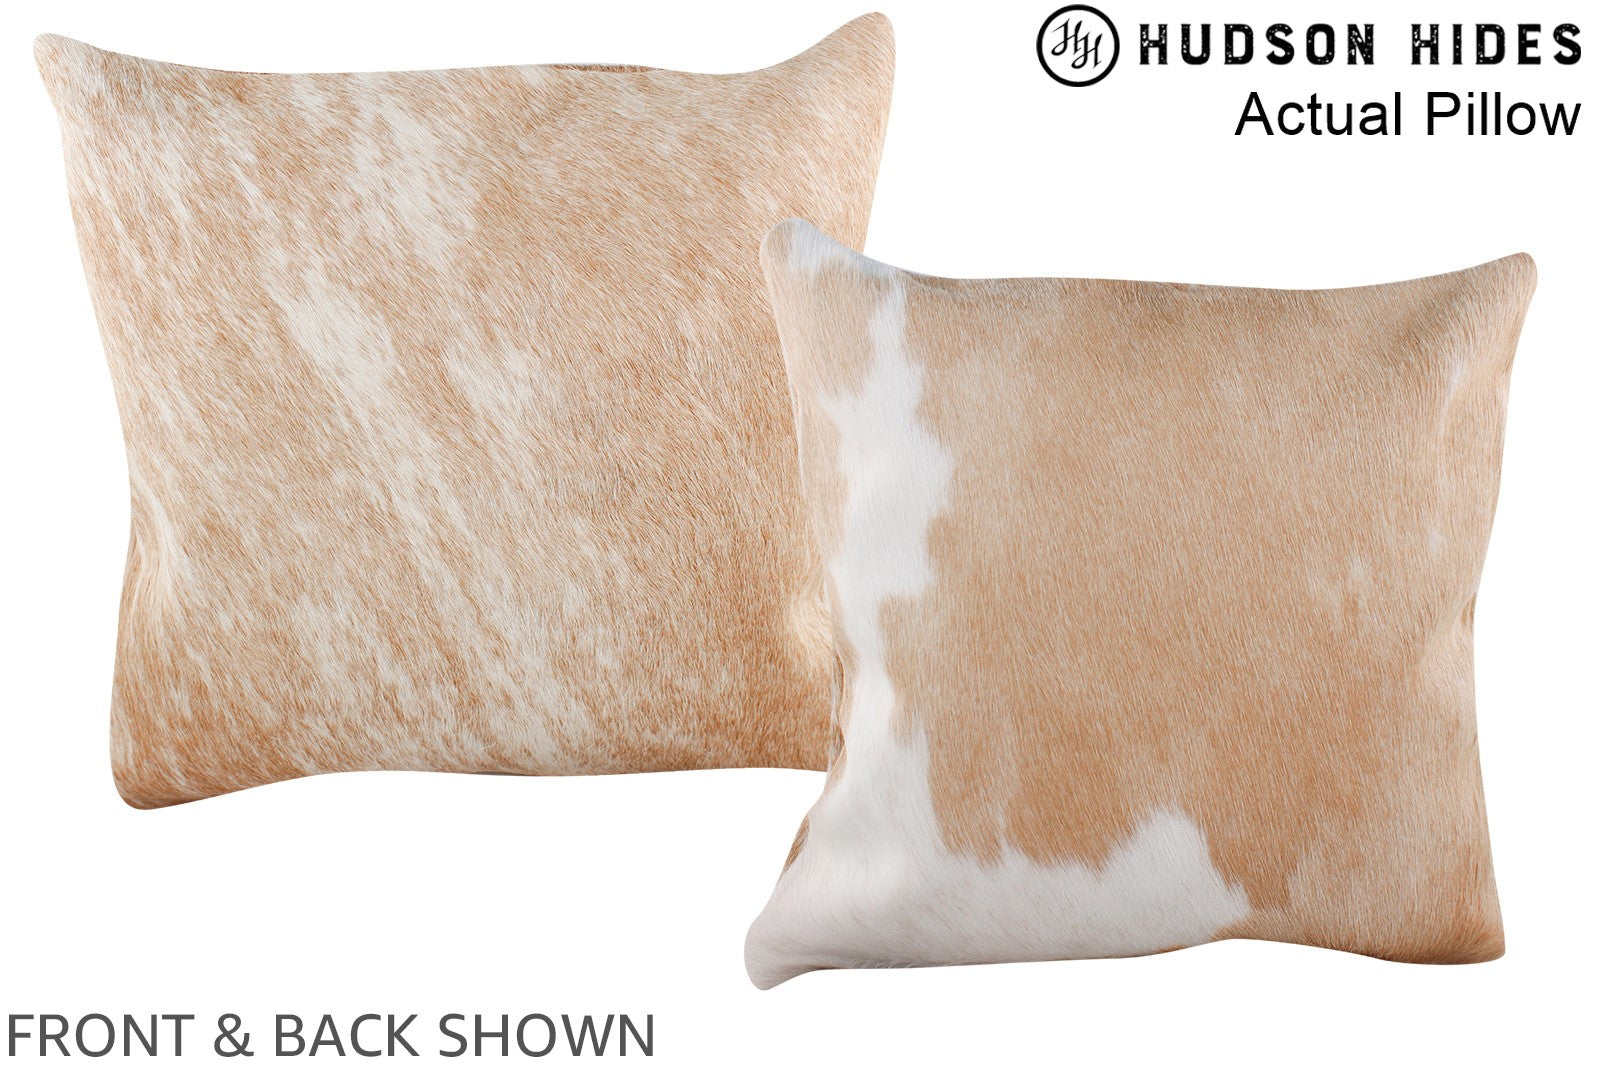 Beige and White Cowhide Pillow #A13674